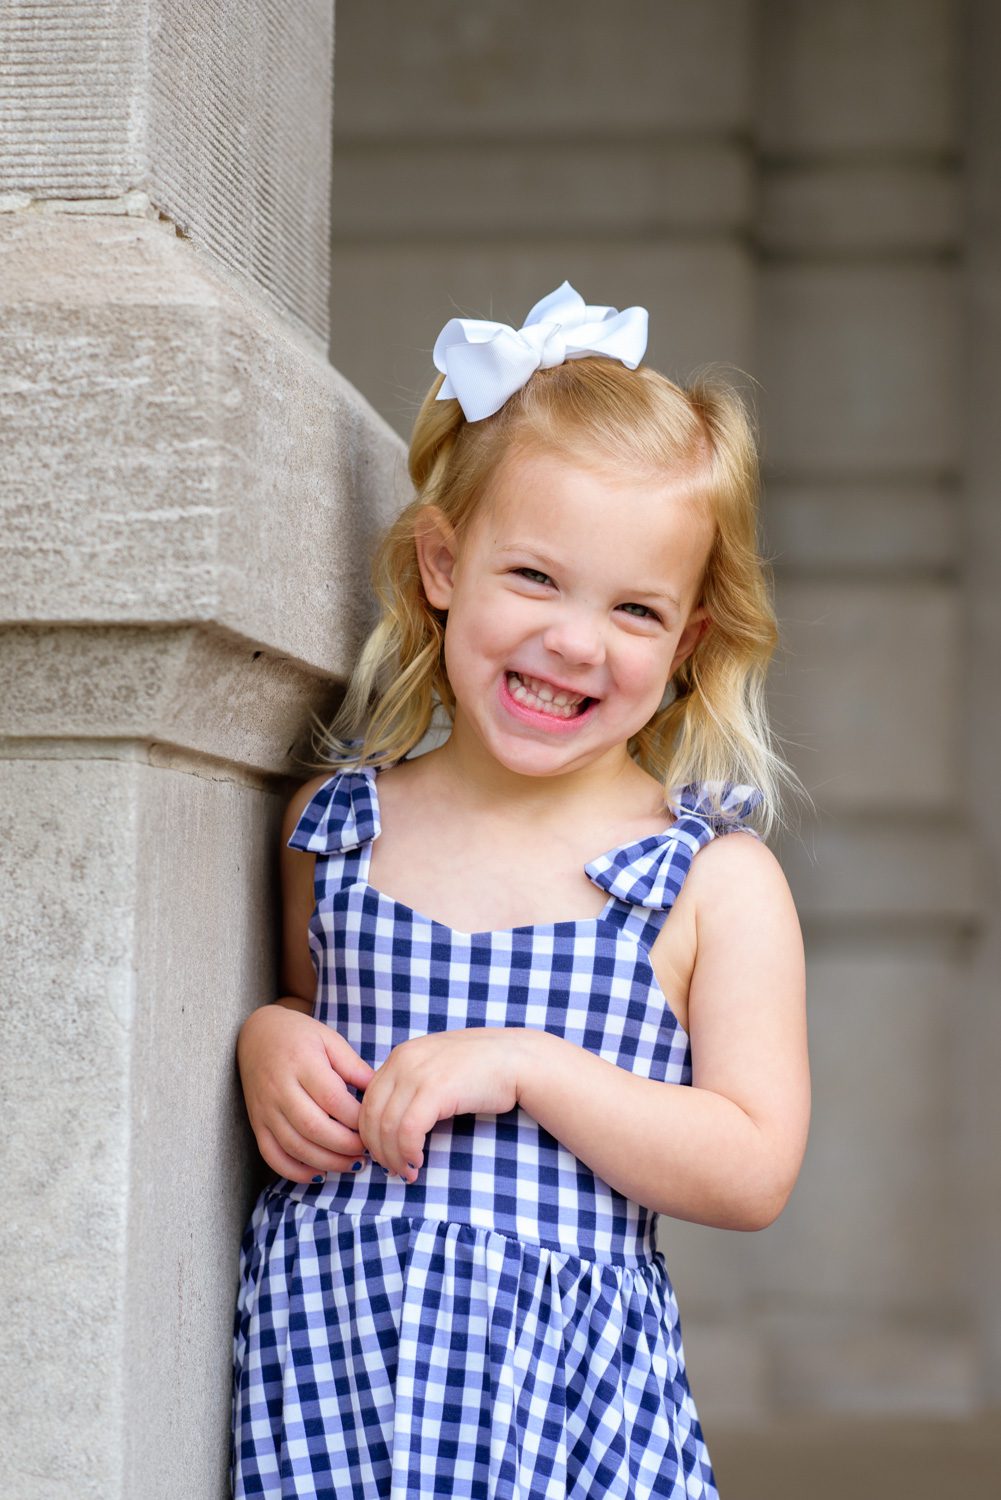 A cute smile on young child wearing blue and white dress with bows.